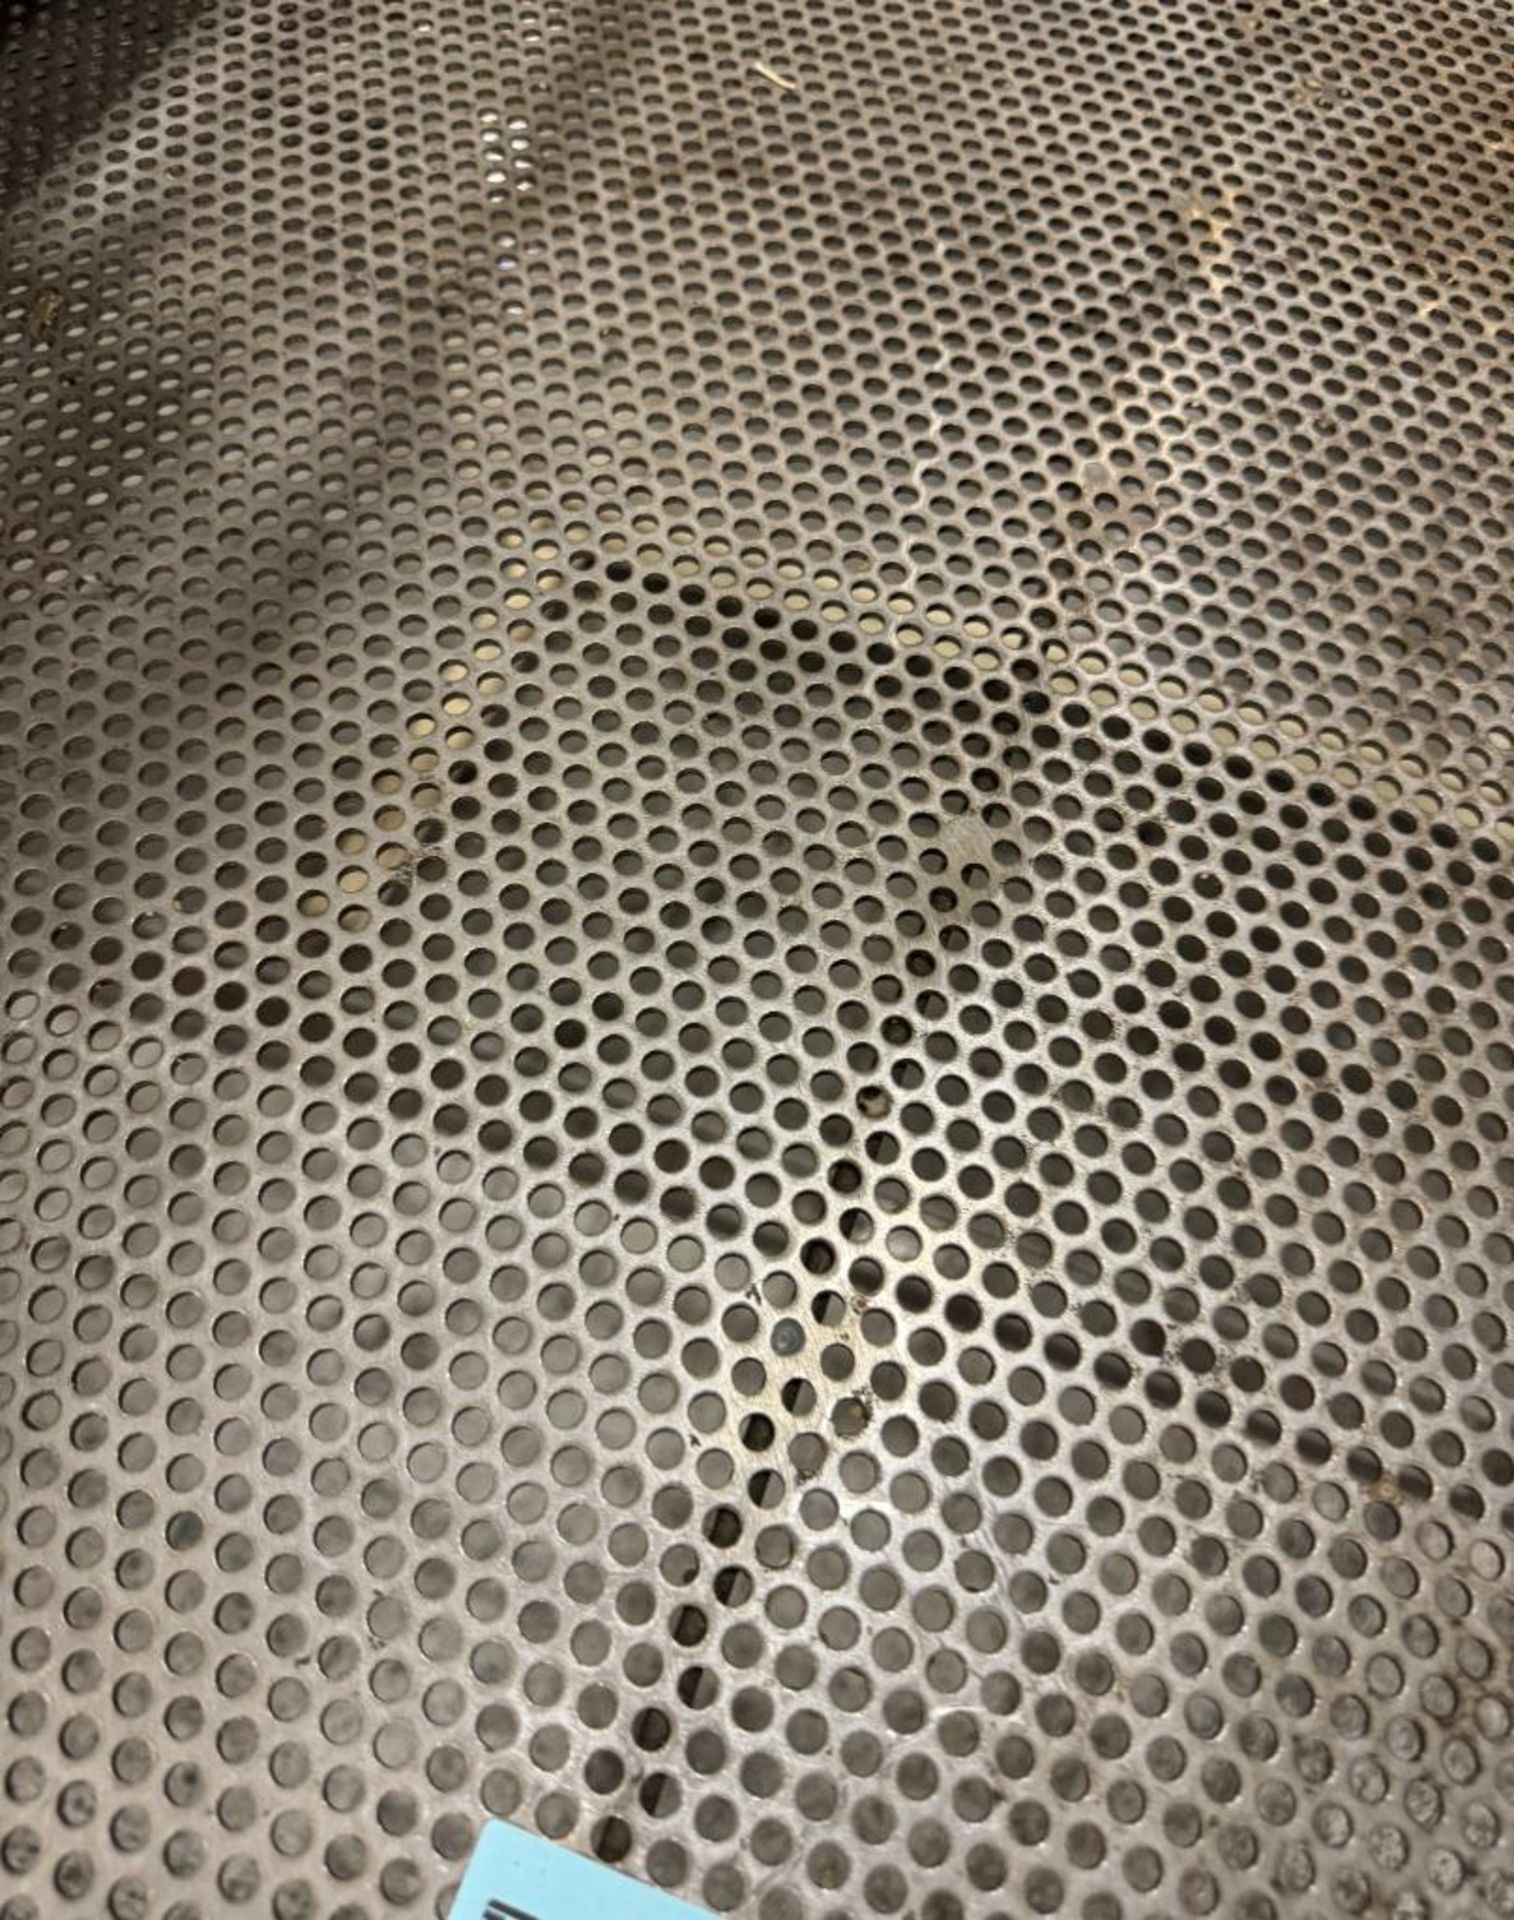 Lot Of (2) Steel Welded Perforated Top Tables, Approximate 36" x 120". - Image 4 of 4